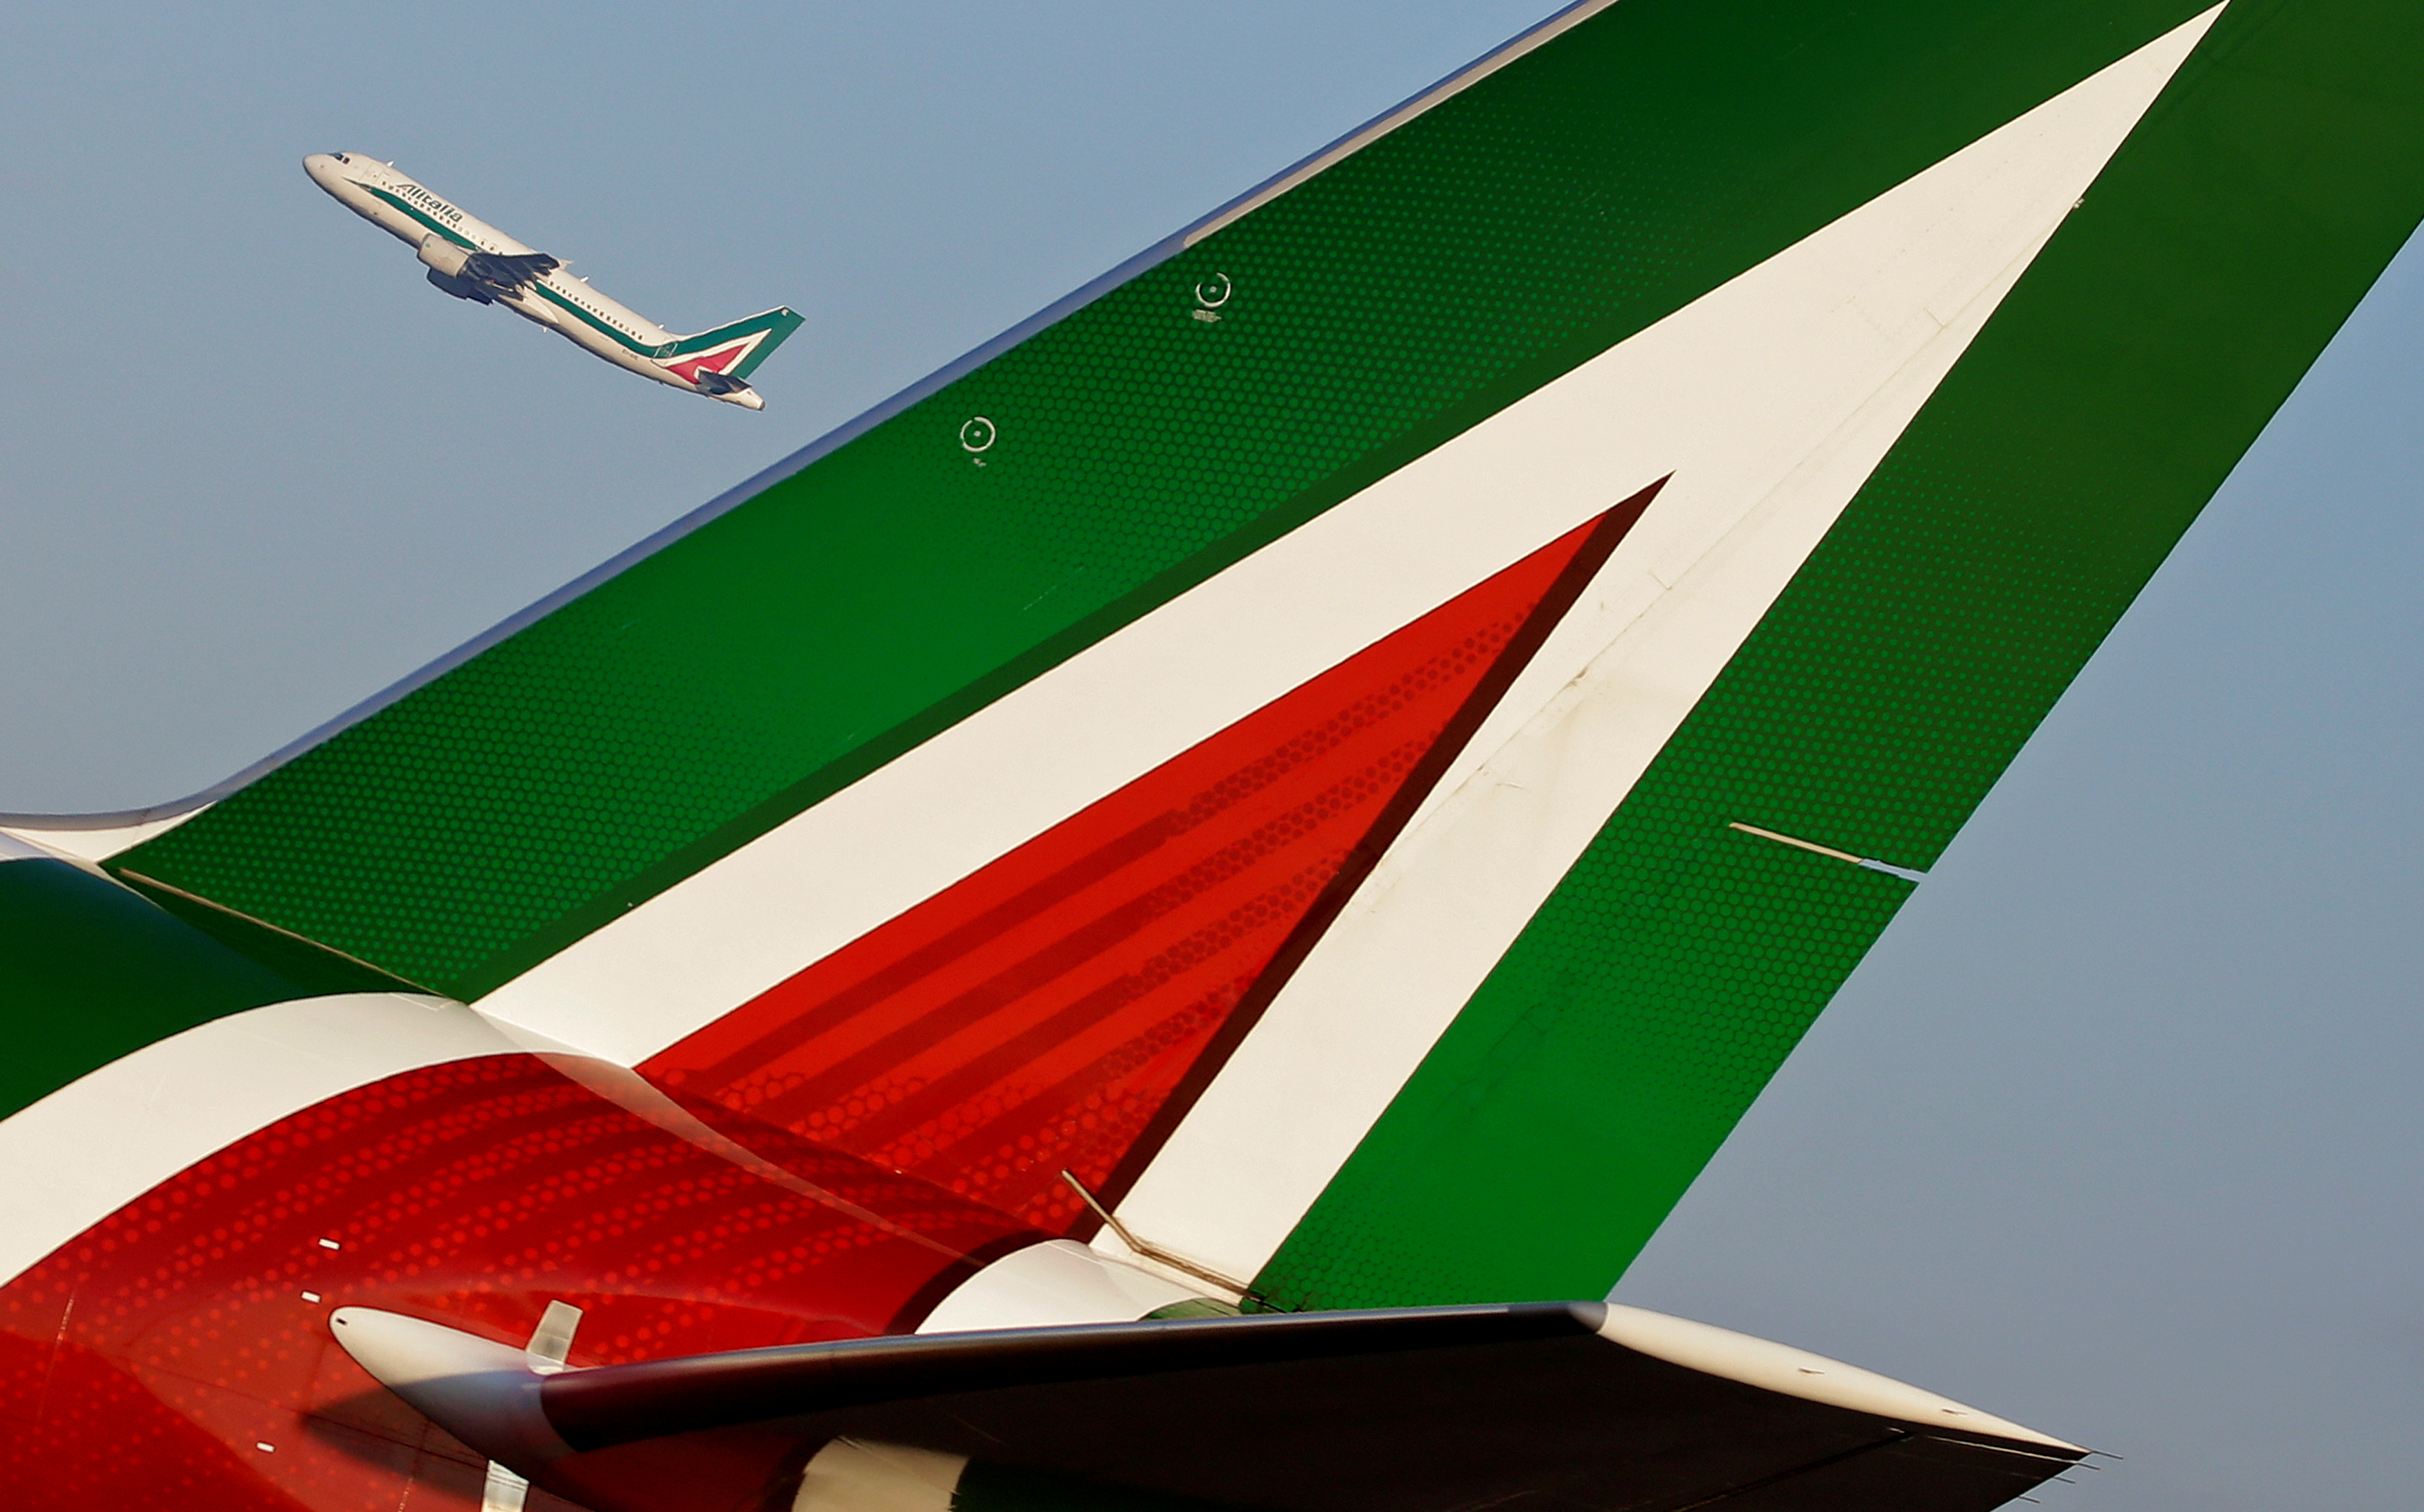 An Alitalia Airbus A320 passenger aircraft takes off at Fiumicino International Airport in Rome